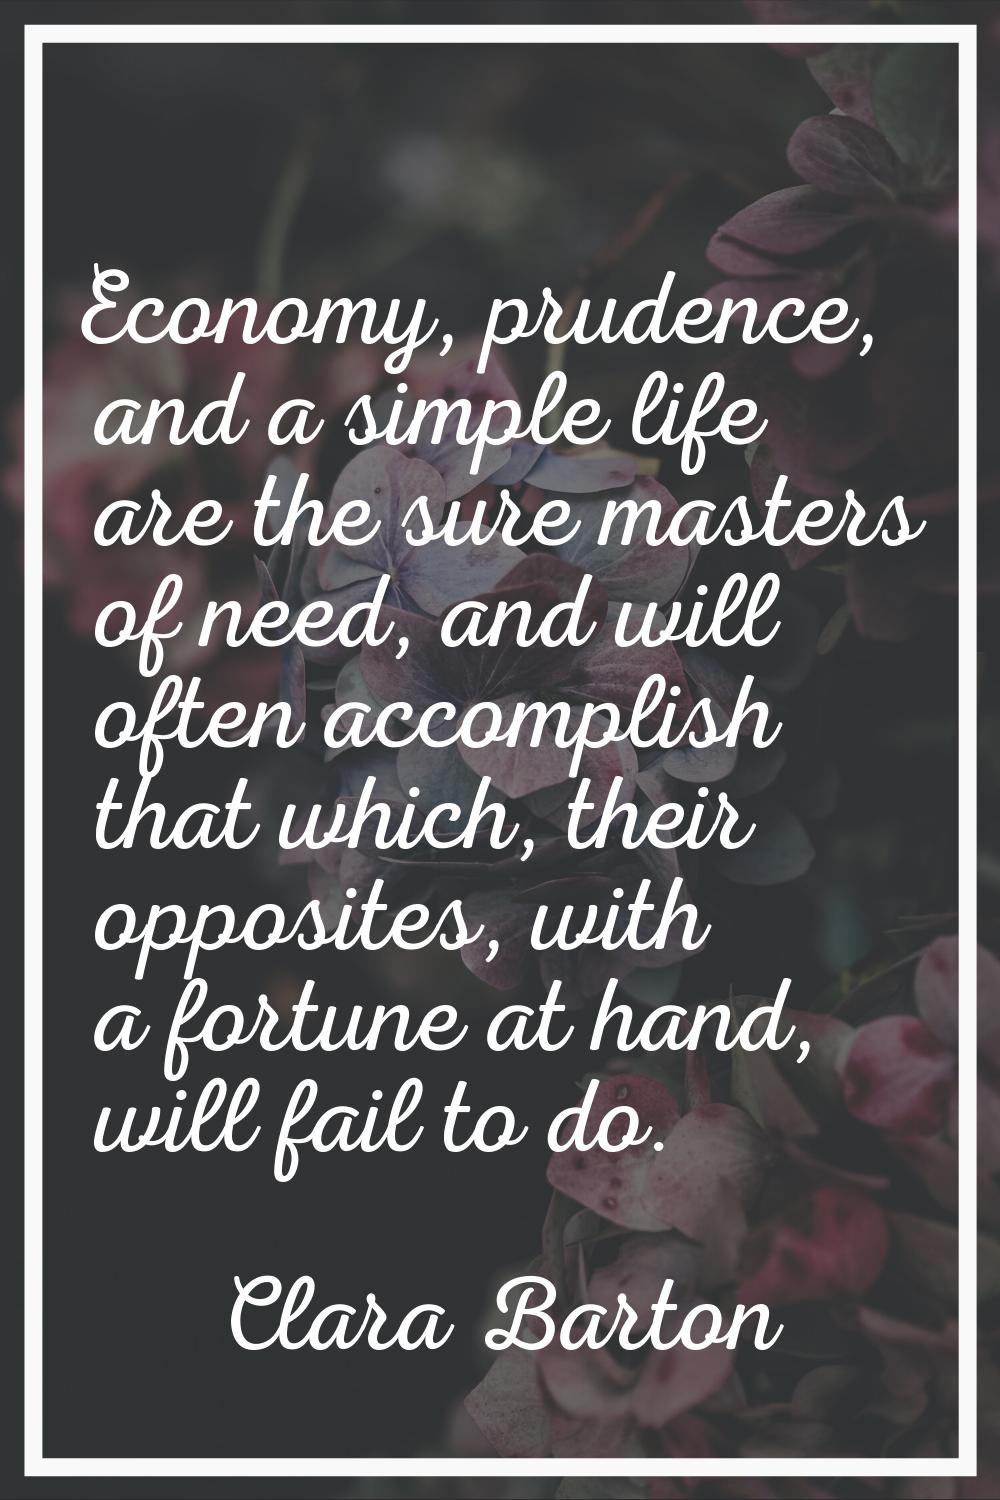 Economy, prudence, and a simple life are the sure masters of need, and will often accomplish that w